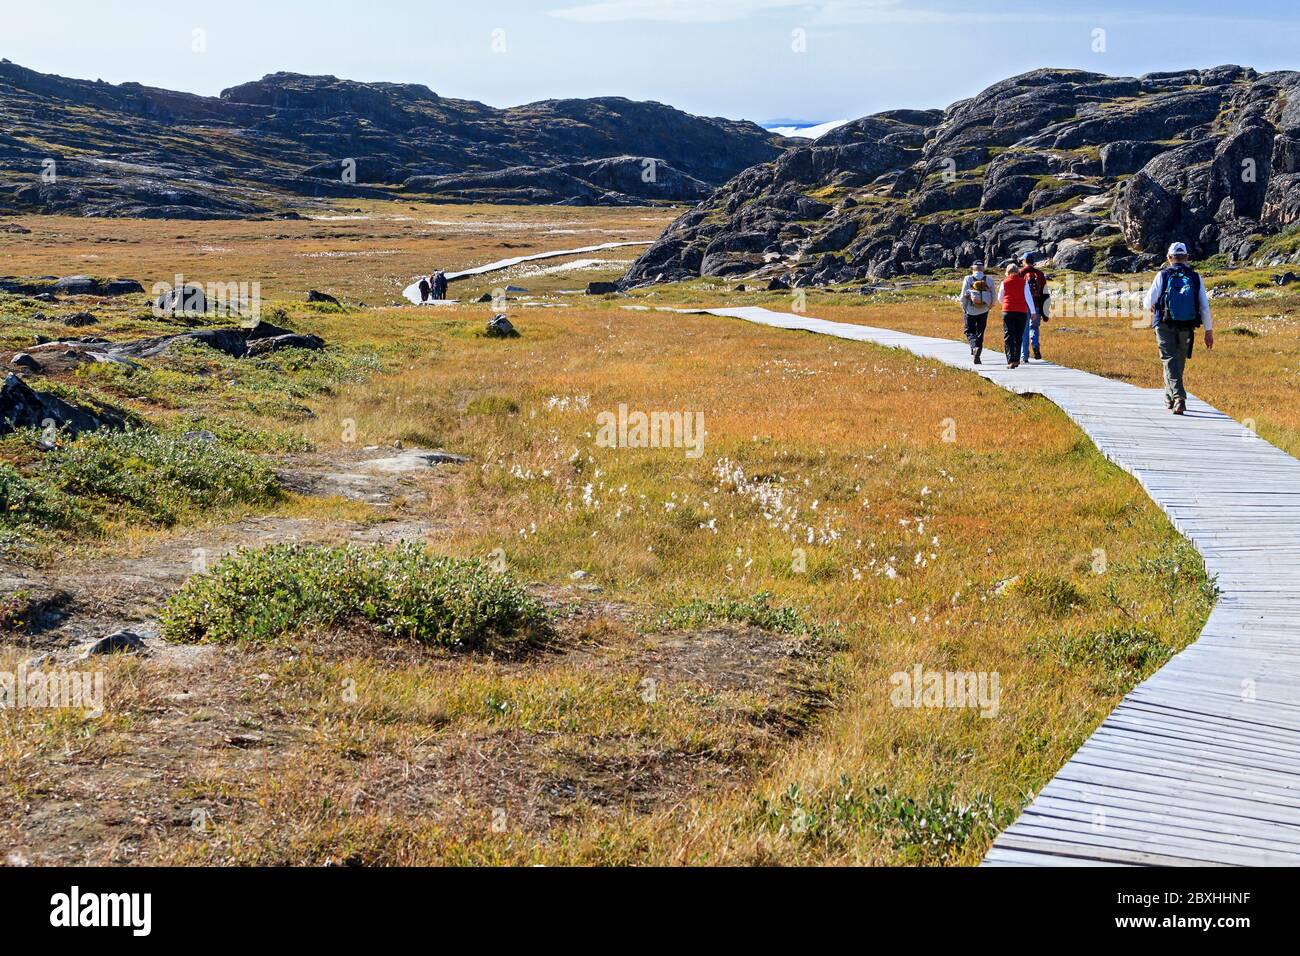 Tourists hike along boardwalk across tundra leading to Jakobshavn (also known as Sermeq Kujalleq) Glacier overlook at Ilulissat, Greenland. Stock Photo